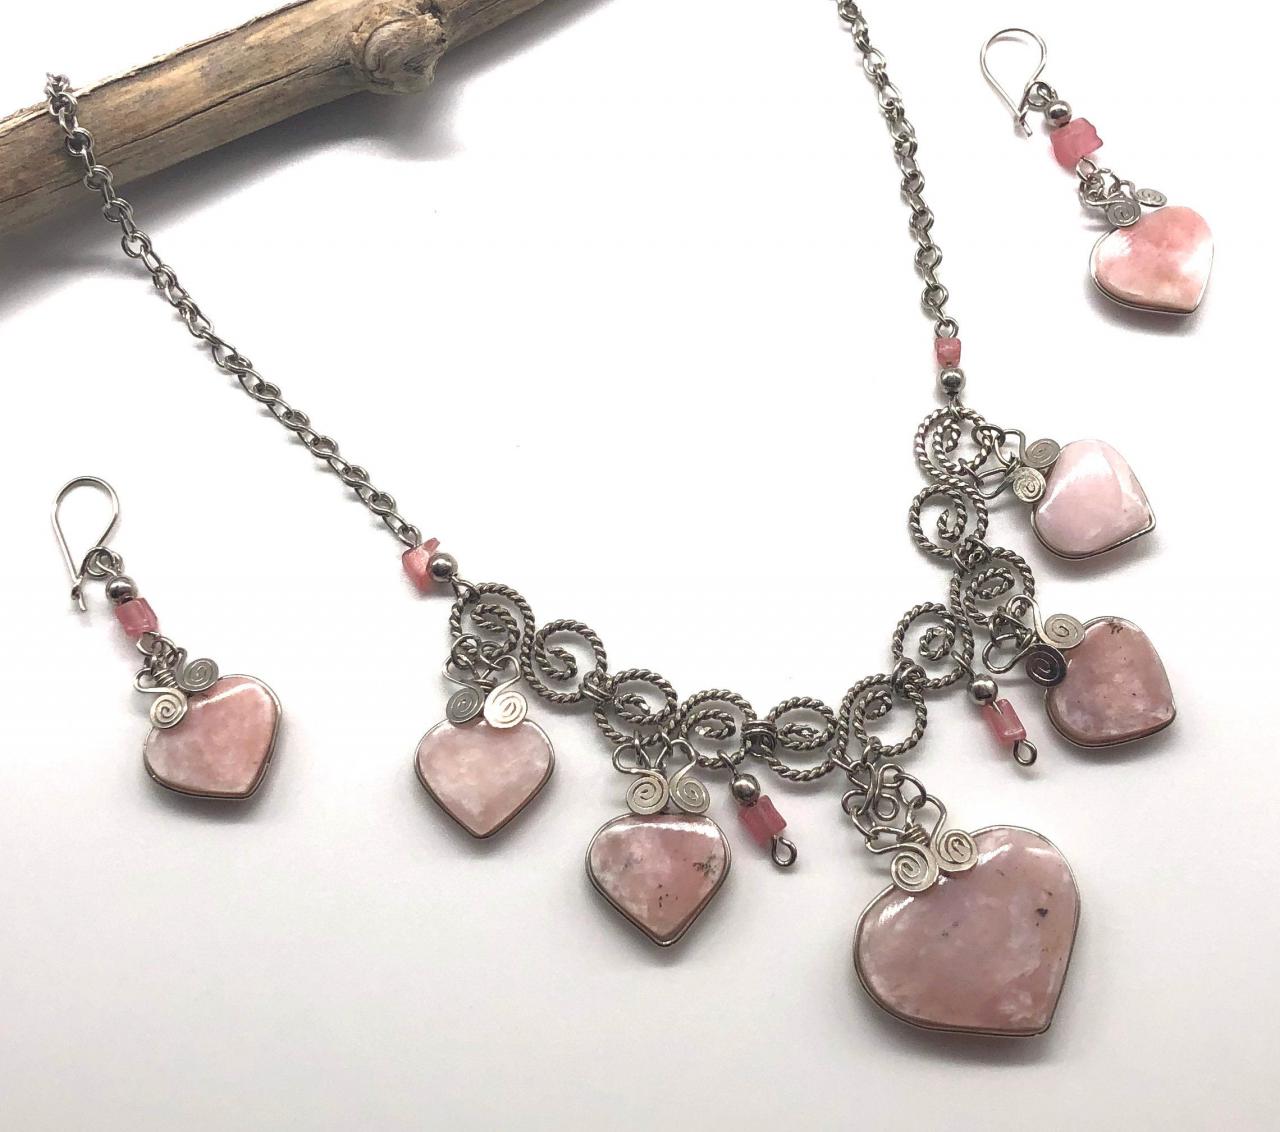 ! Rose Quartz Necklace And Earrings,heart Shape Necklace, Handmade Necklace, Romantic Necklace, Eco Friendly Necklace, Filigree Necklace